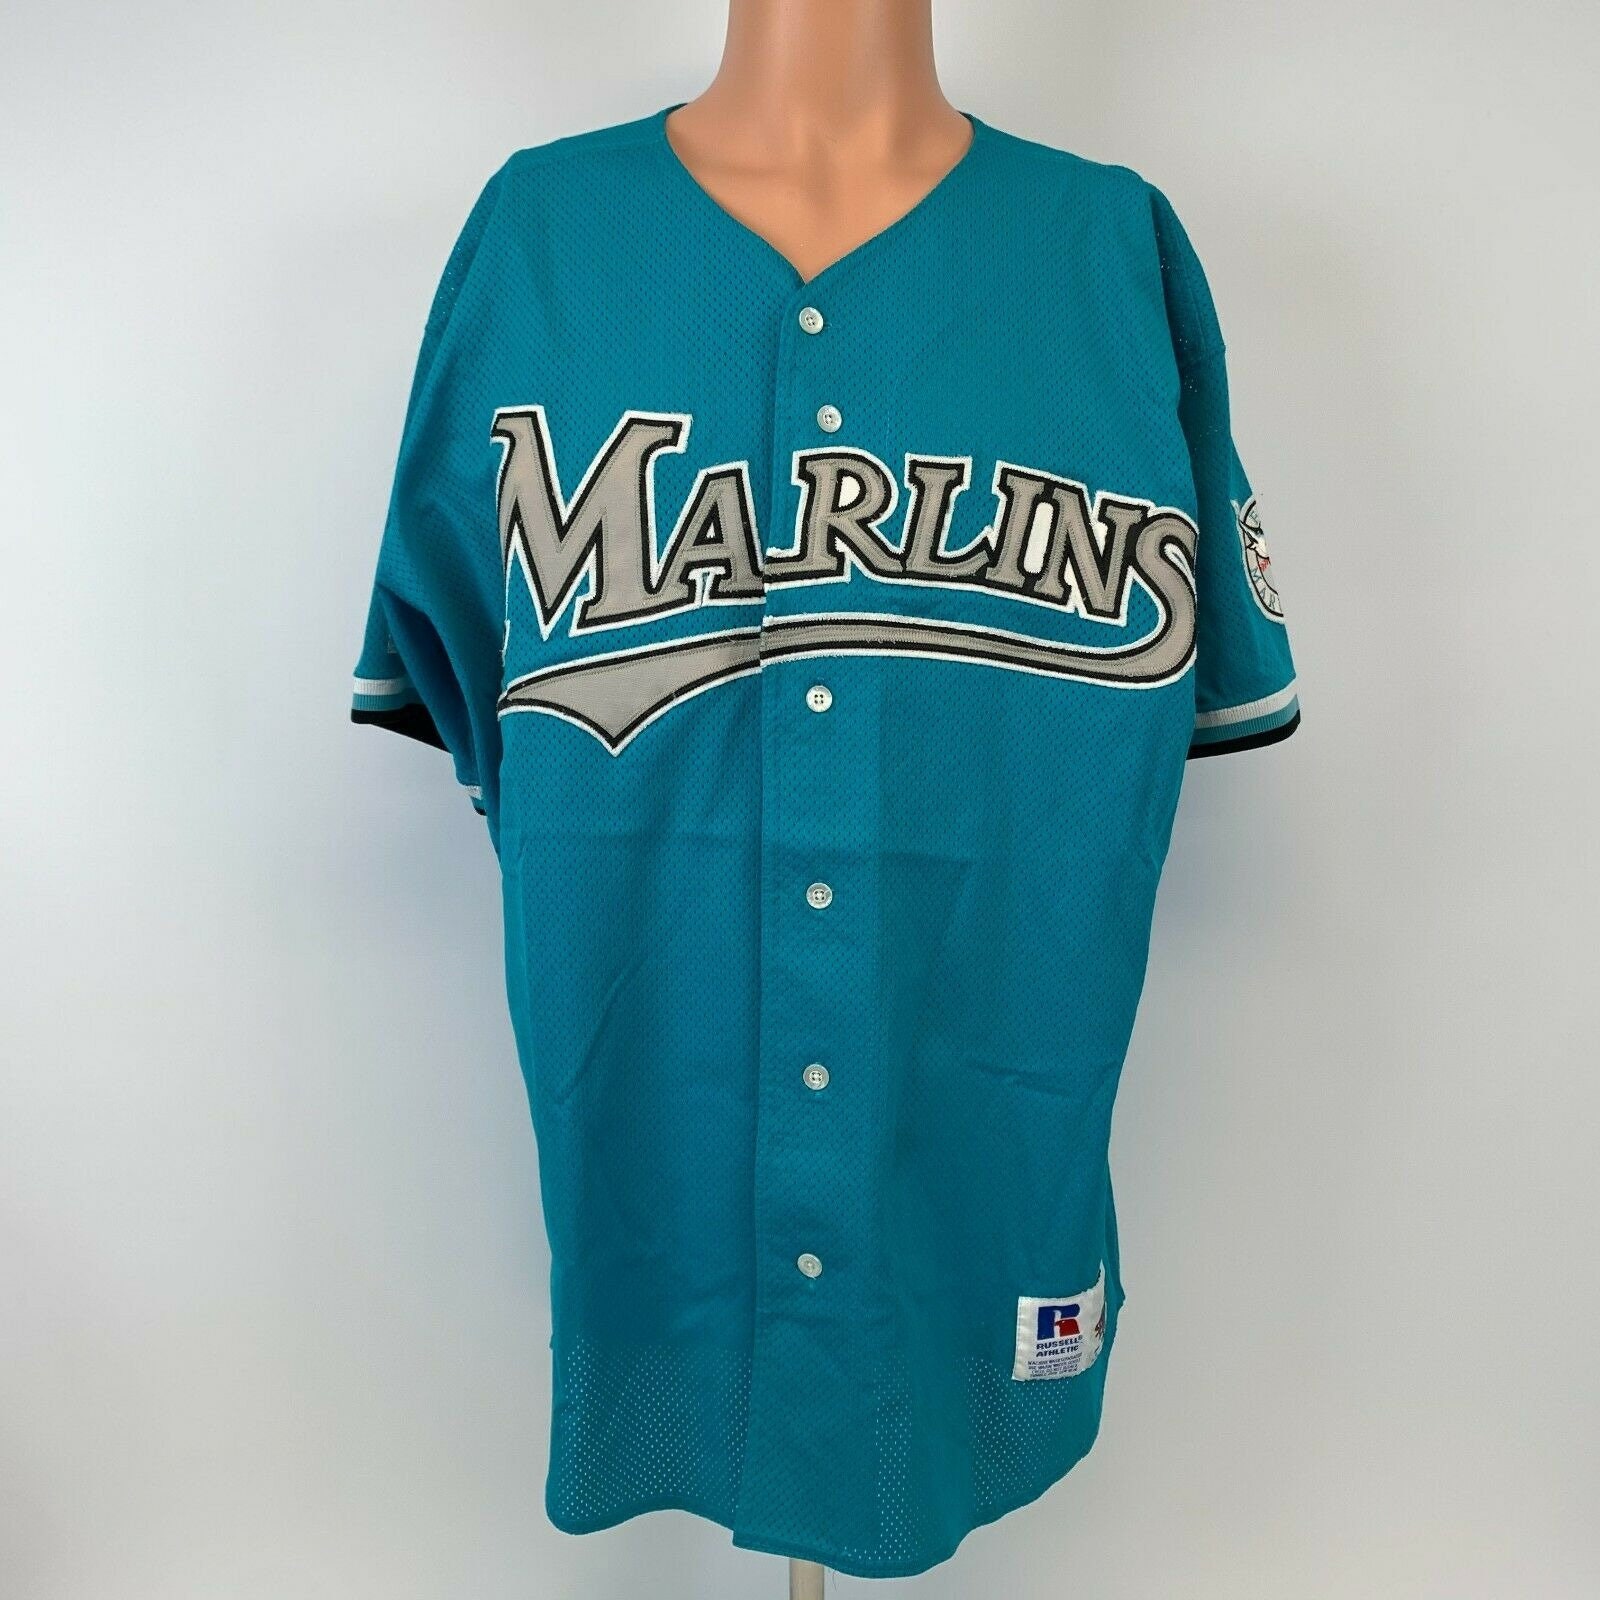 BeantownFinds Russell Authentic Andre Dawson Florida Marlins Jersey Vtg 90s MLB Diamond 48